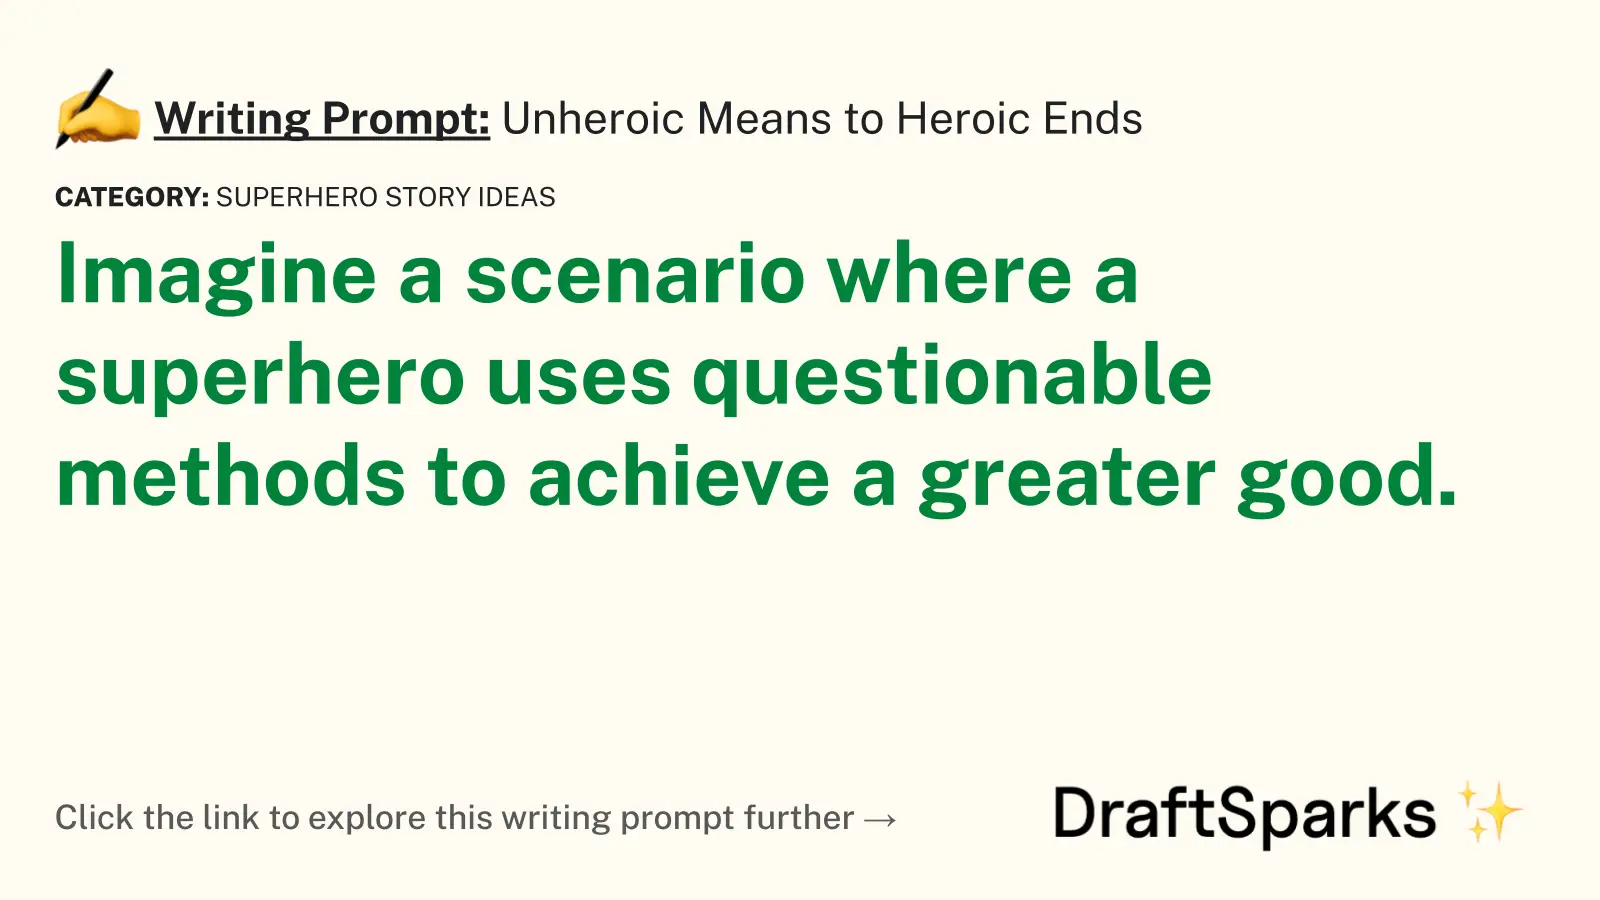 Unheroic Means to Heroic Ends